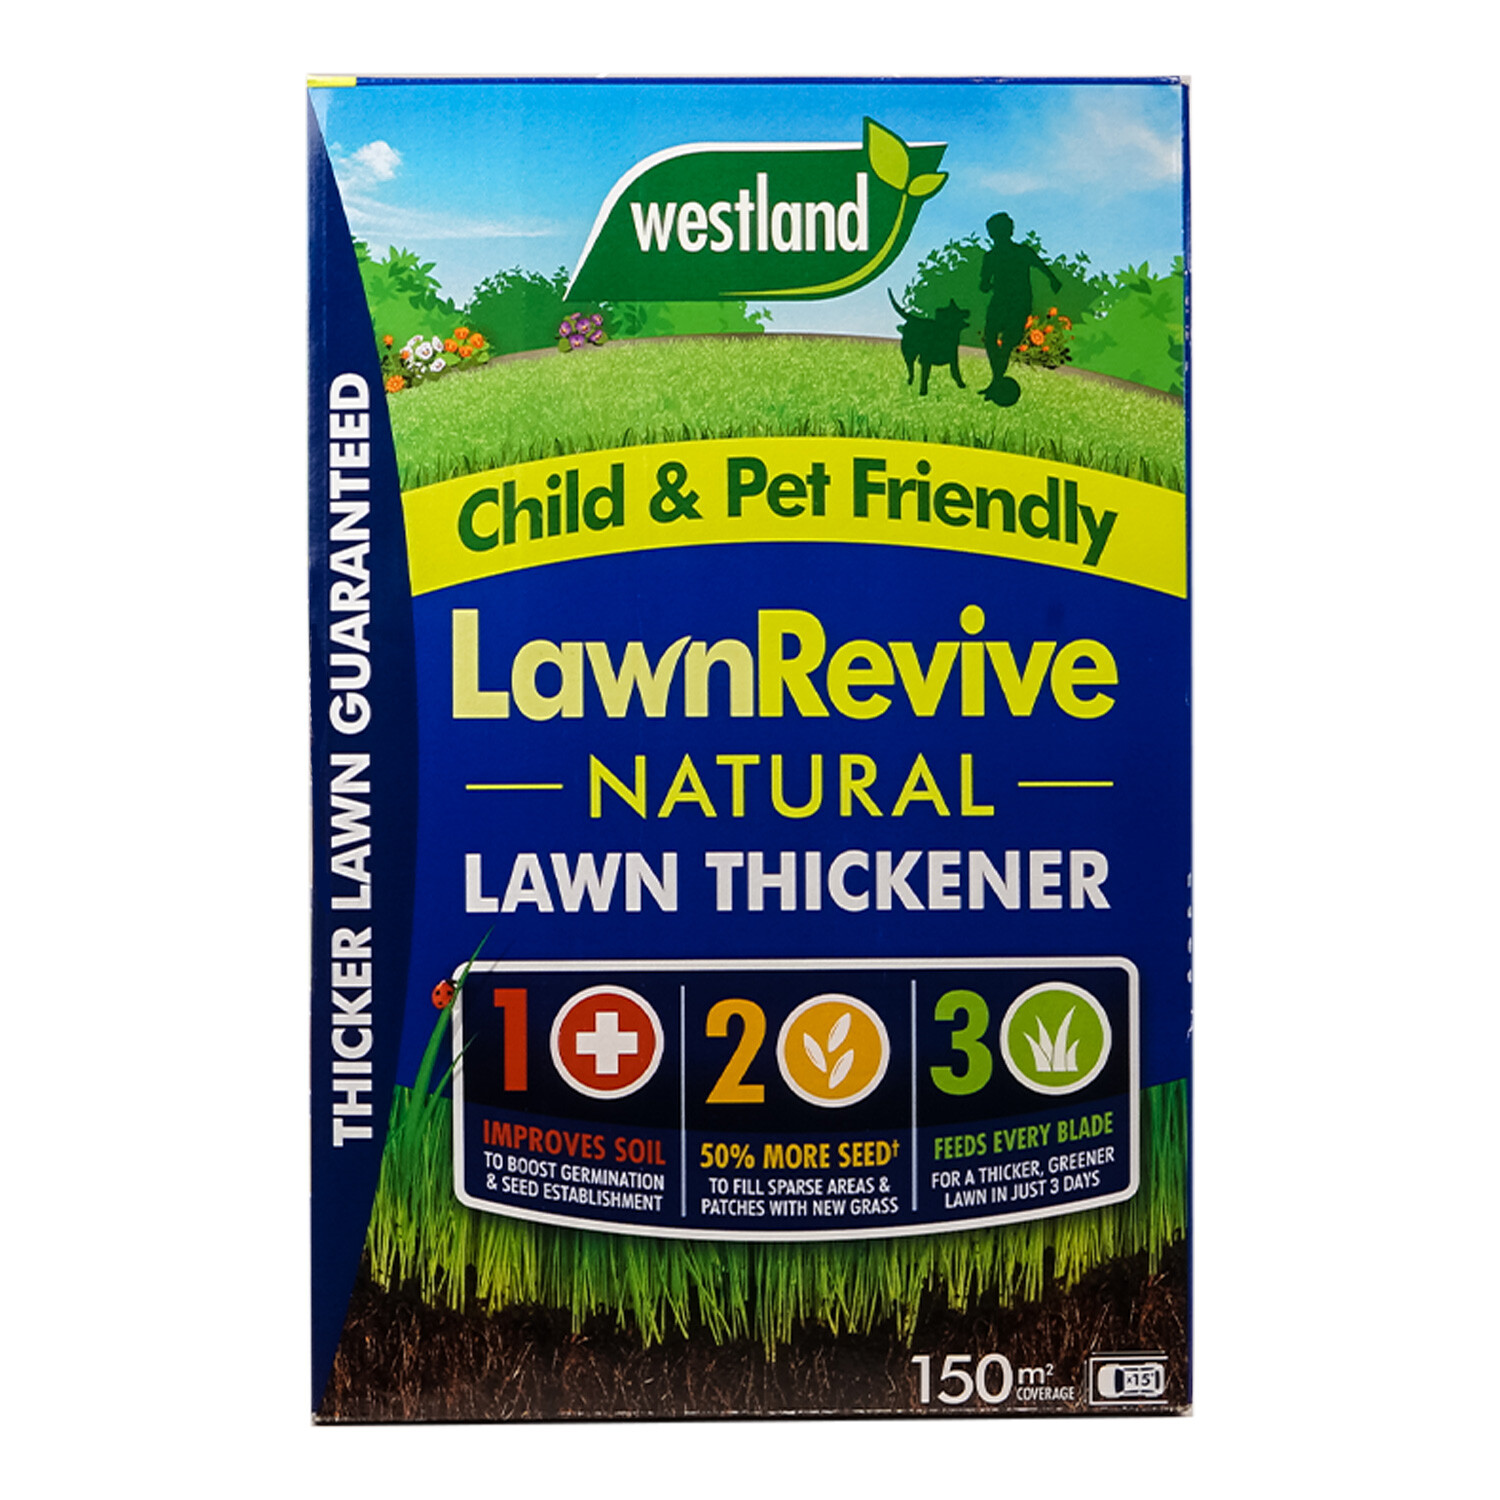 Westland Natural Lawn Thickener and Revive Image 1